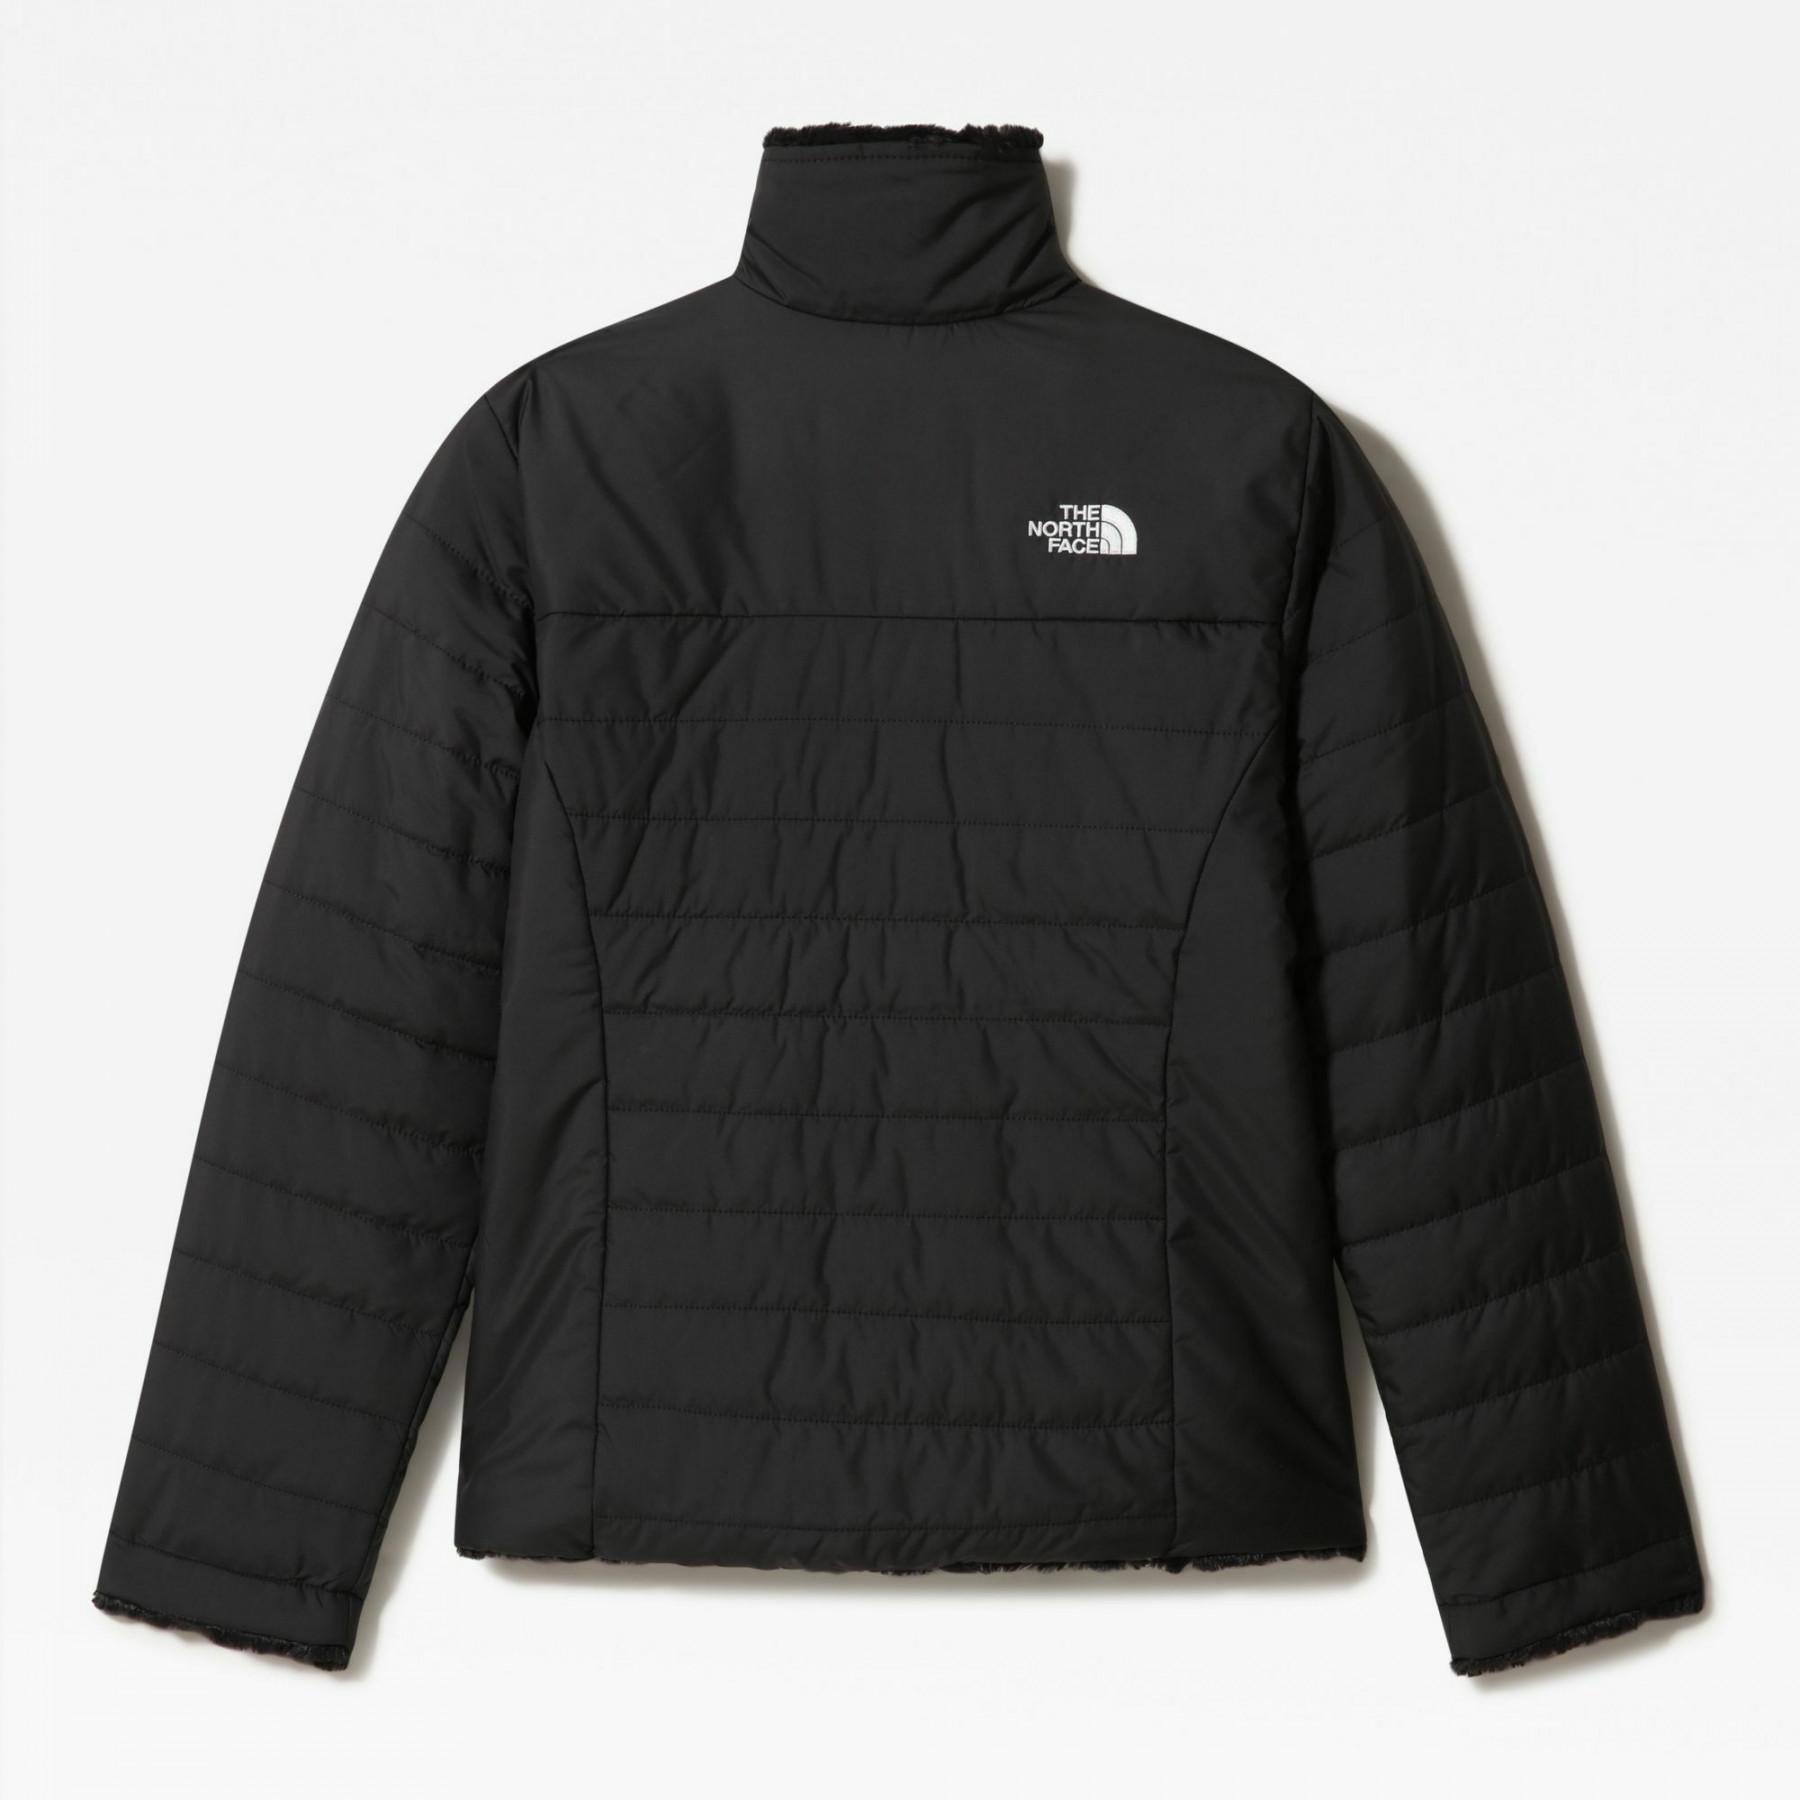 Kinderjas The North Face Reversible Mossbud